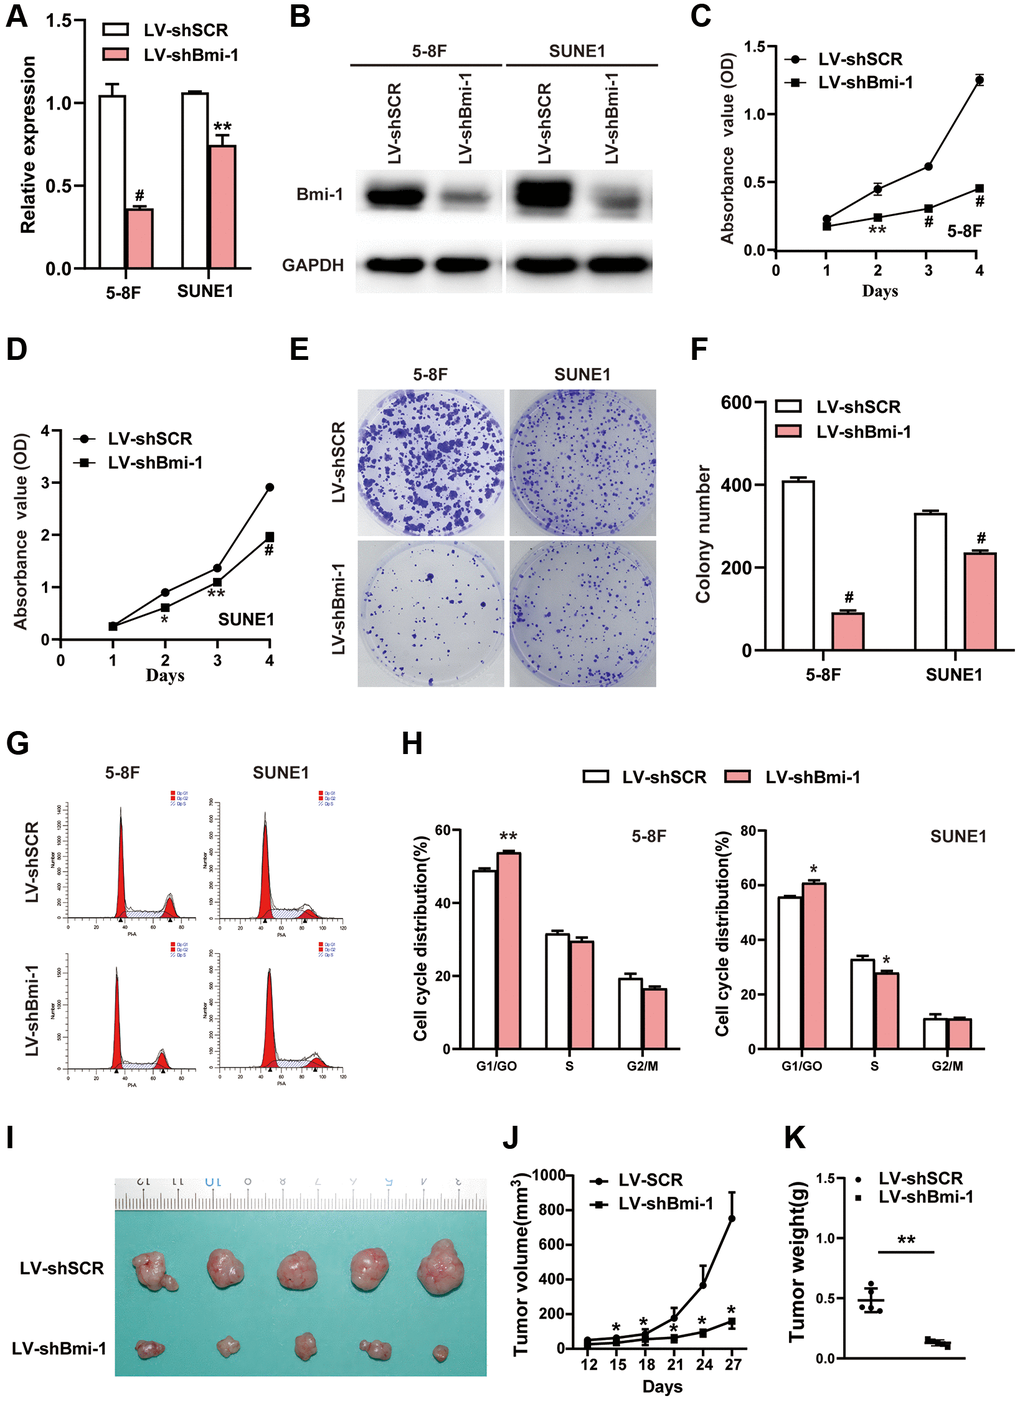 RNAi-induced knockdown of Bmi-1 inhibited the in vitro proliferation and in vivo tumorigenesis of NPC cells. (A) The relative mRNA levels of Bmi-1 in shBmi-1-expressing 5-8F and SUNE1 cells were determined via qRT-PCR. SCR: scrambled control shRNA. (B) The protein levels of Bmi-1 in shBmi-1-expressing 5-8F and SUNE1 cells were determined via Western blotting. (C, D) A CCK8 assay was employed to assess the growth of shBmi-1-expressing 5-8F and SUNE1 cells. (E, F) A colony formation assay was used to examine the proliferation abilities of shBmi-1-expressing 5-8F and SUNE1 cells. (G, H) Propidium iodide staining and flow cytometry were used to detect the cell cycle distributions of shBmi-1-expressing 5-8F and SUNE1 cells (G), and the statistical results were calculated (H). (I–K) Bmi-1 knockdown inhibited tumor growth from 5-8F cells in nude mice. A representative tumor picture is shown (I), along with a tumor volume growth curve (J) and the tumor weights (K).